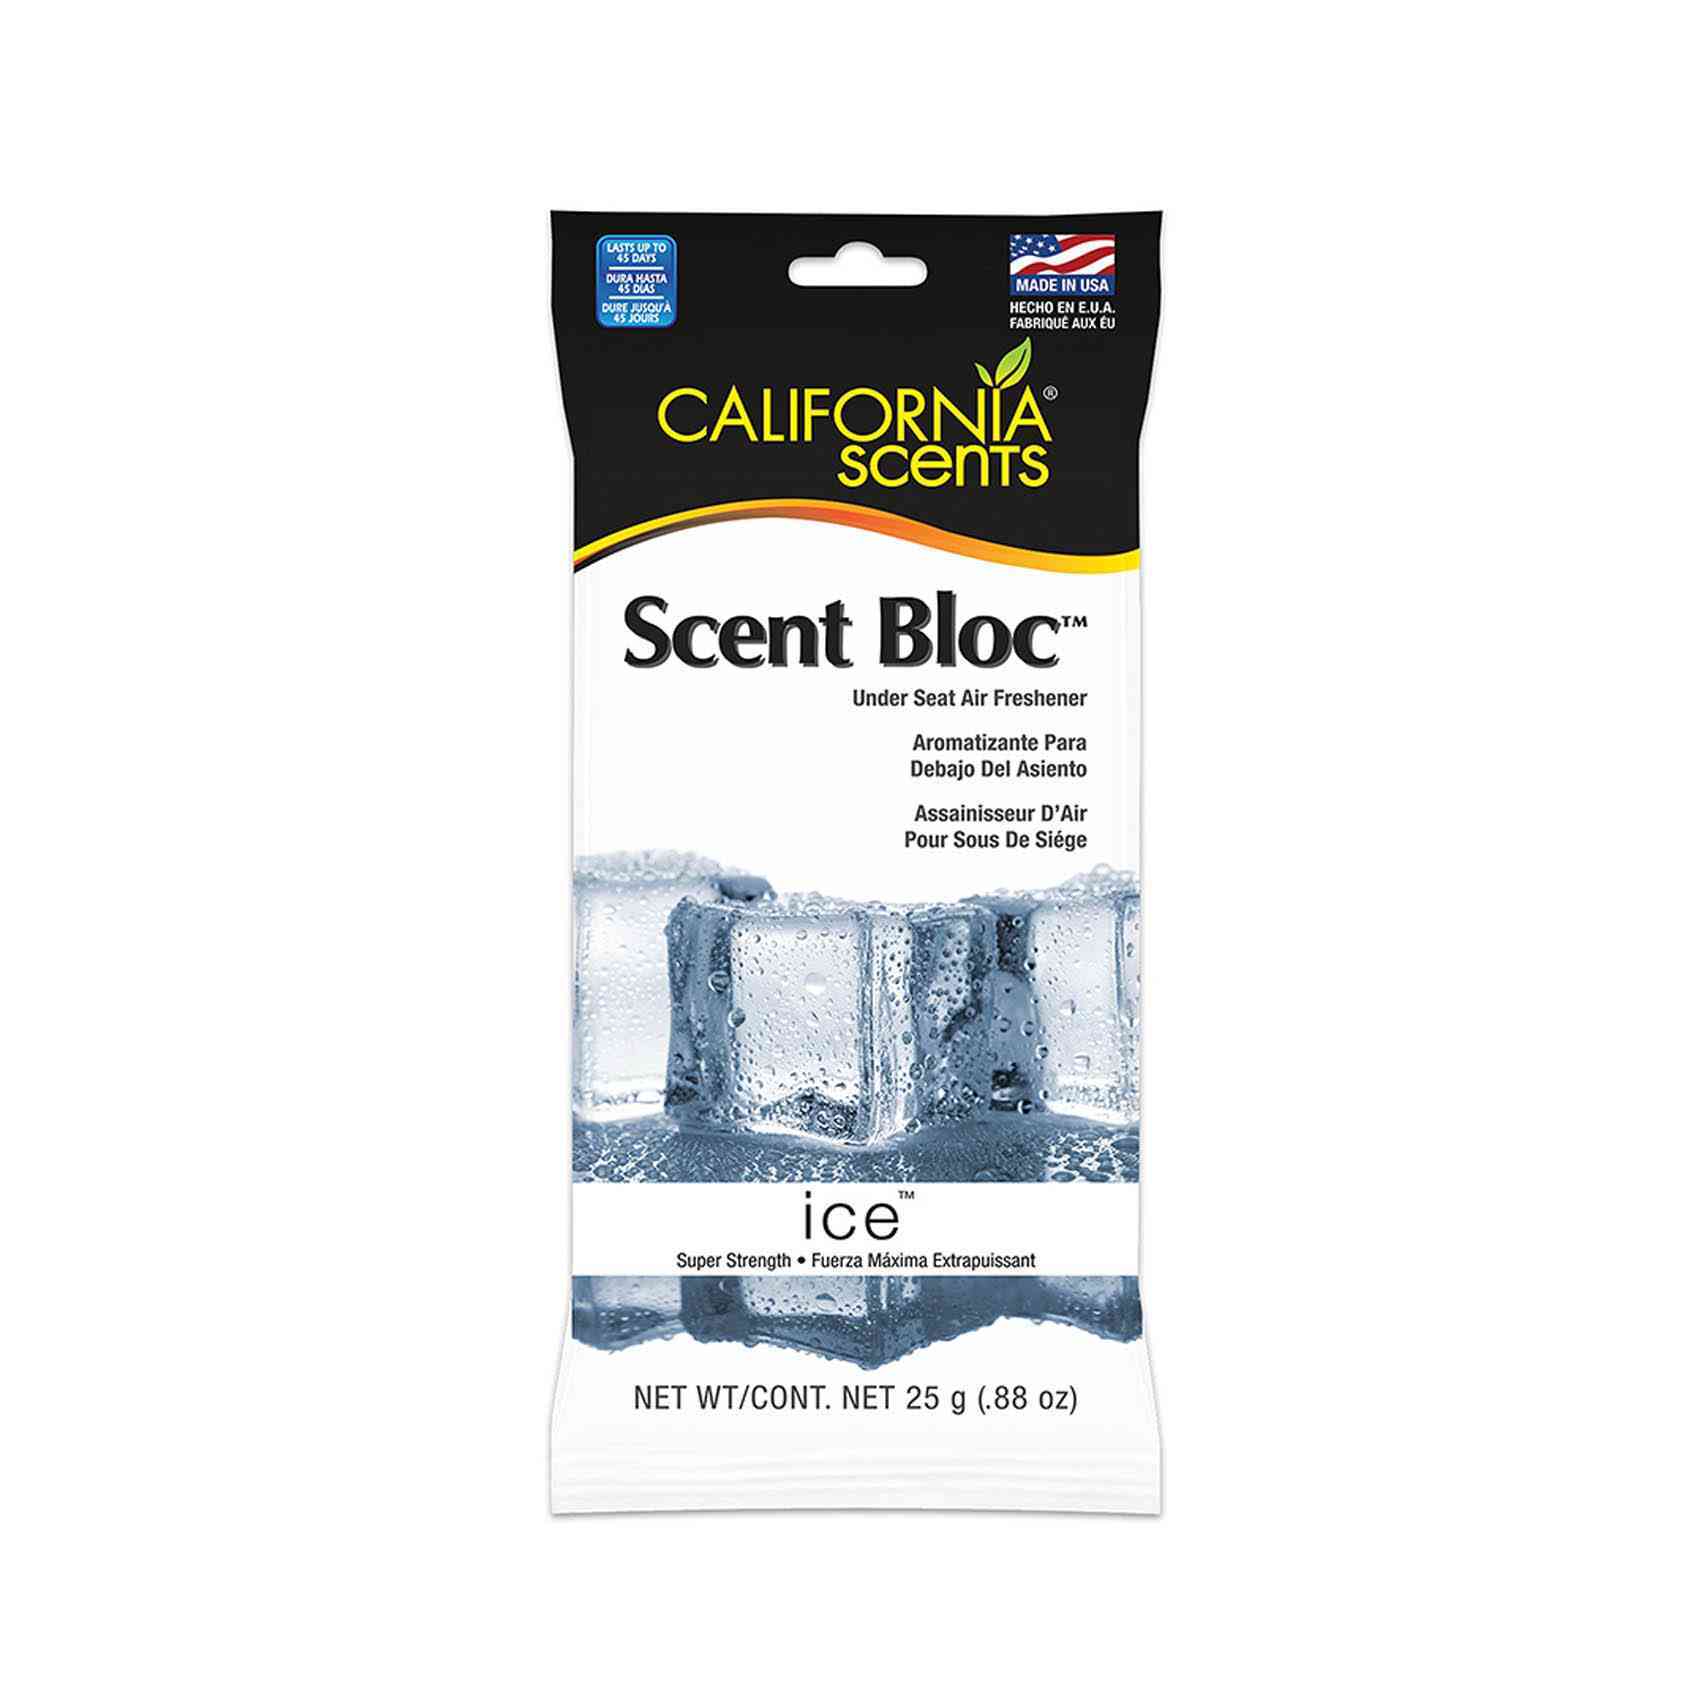 Buy CALIFORNIA SCENT Online - Shop on Carrefour Qatar